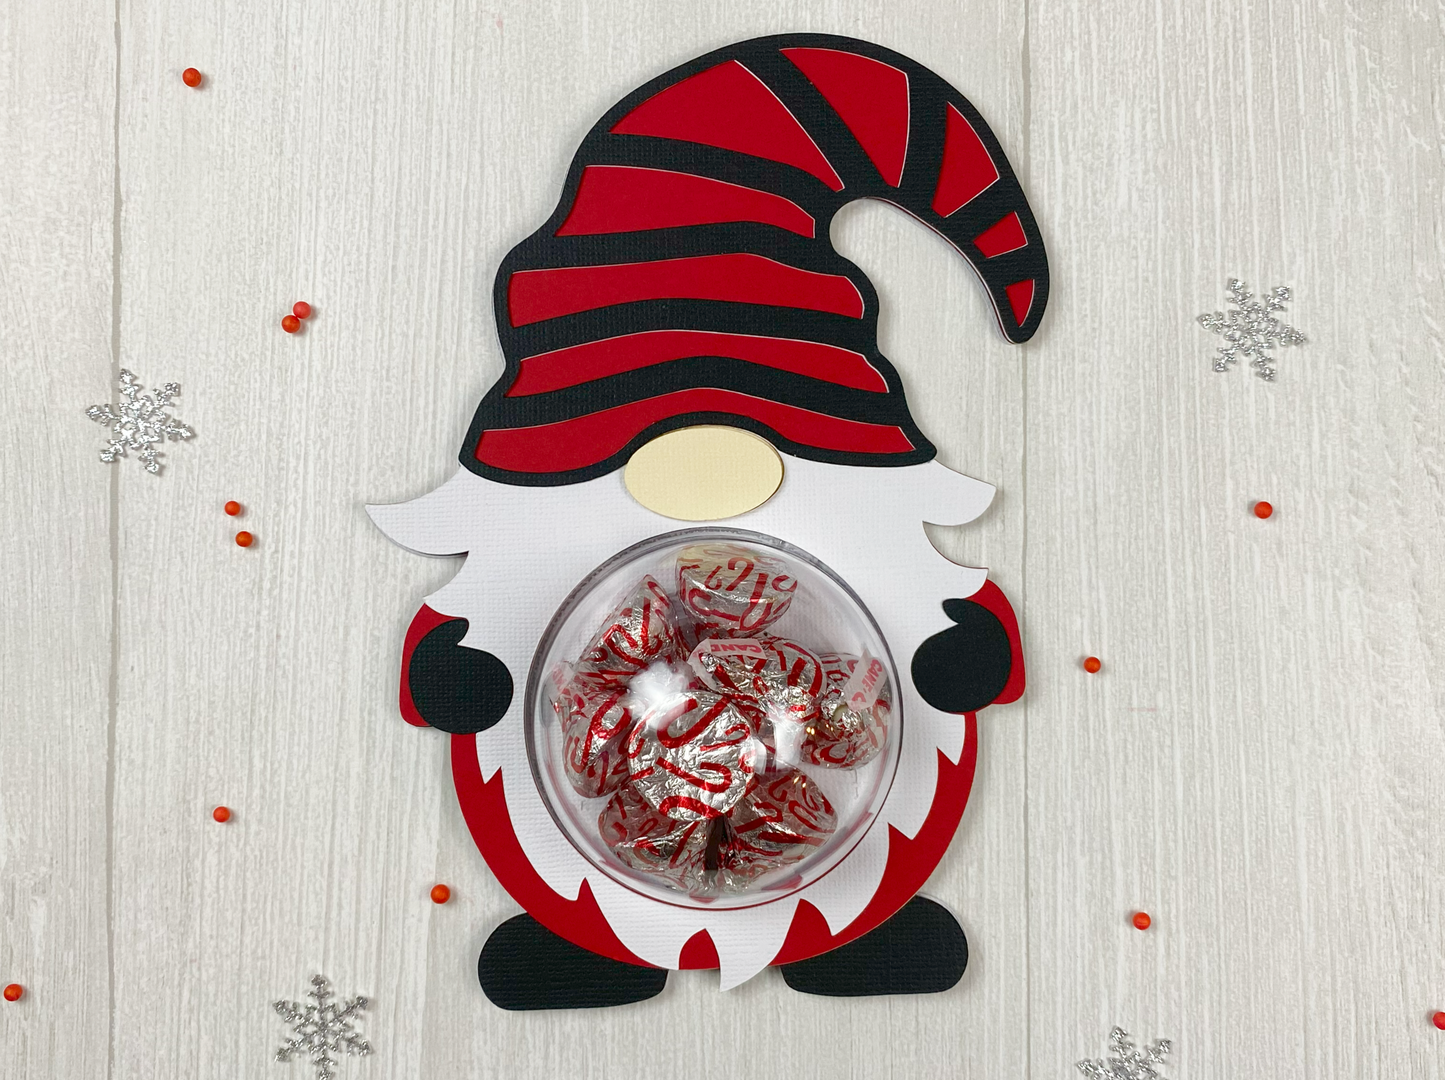 Gnome dome candy holder. Perfect for Christmas, winter or holiday party favors or stocking stuffers.